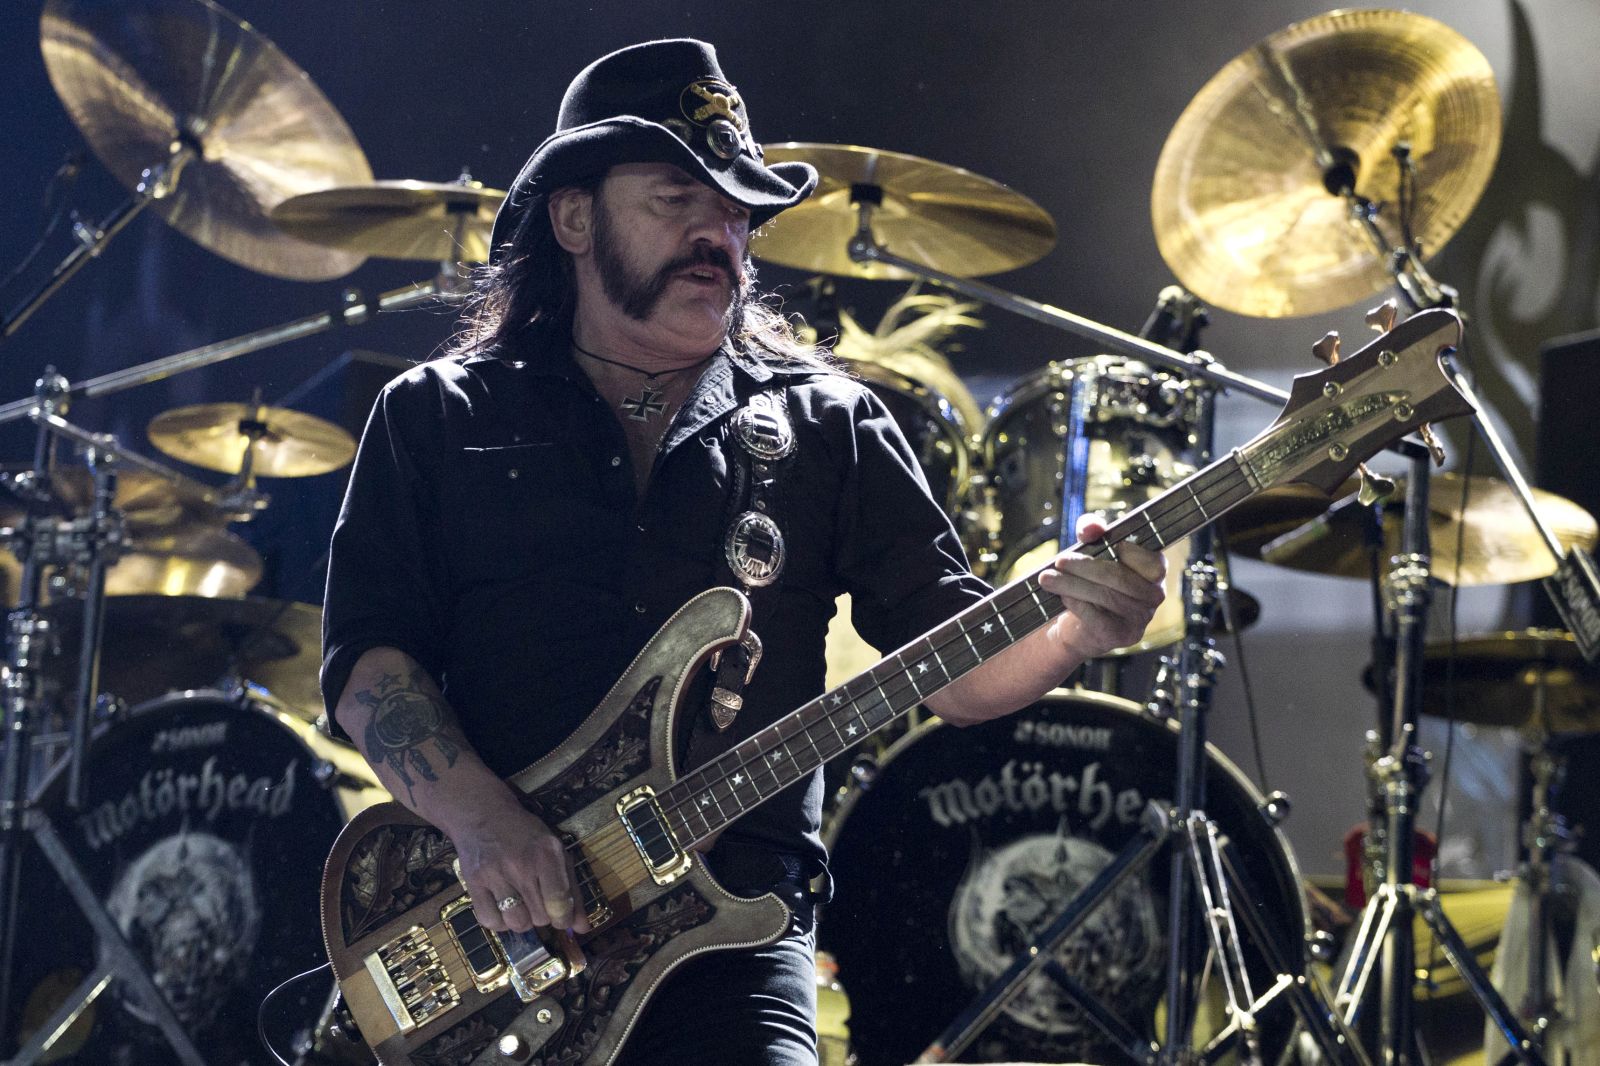 Ian Fraser "Lemmy" Kilmister of Motorhead performs during the Rock in Rio music festival in Rio de Janeiro, Brazil, Sunday Sept.  25, 2011. The festival, which runs through Oct. 2, includes performances by Katy Perry, Rihanna, Stevie Wonder, Red Hot Chili Peppers, Metallica, Guns N' Roses and Coldplay. (AP Photo/Felipe Dana)